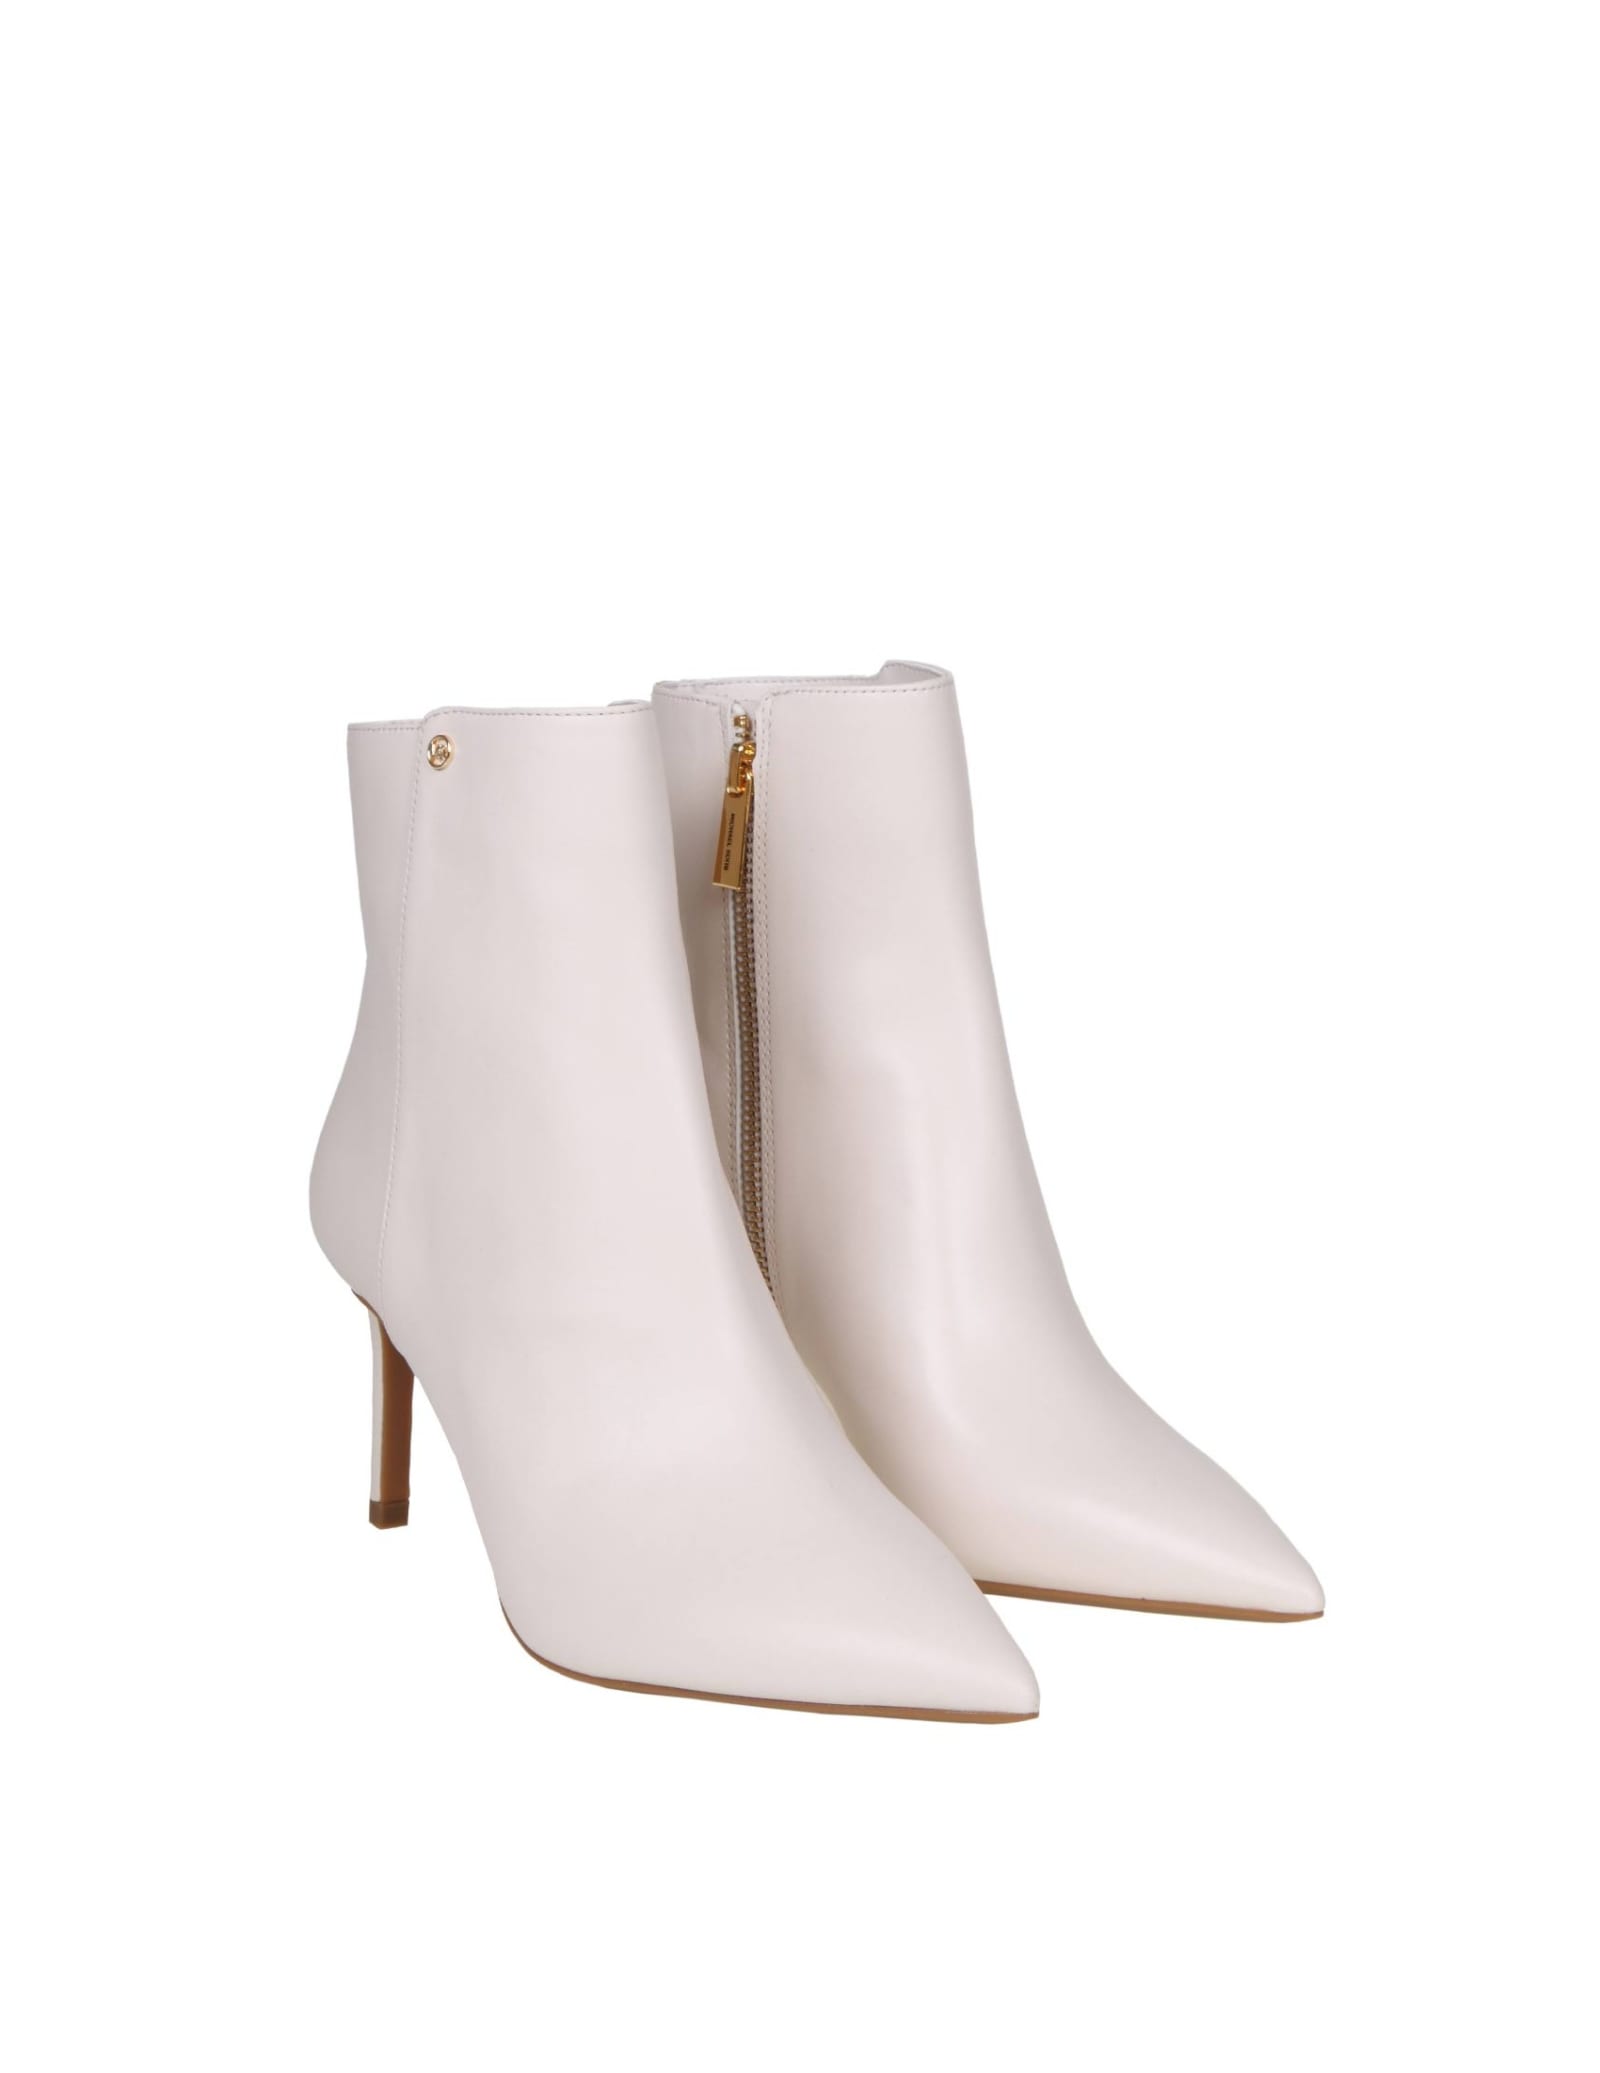 Shop Michael Kors Boots In White Leather